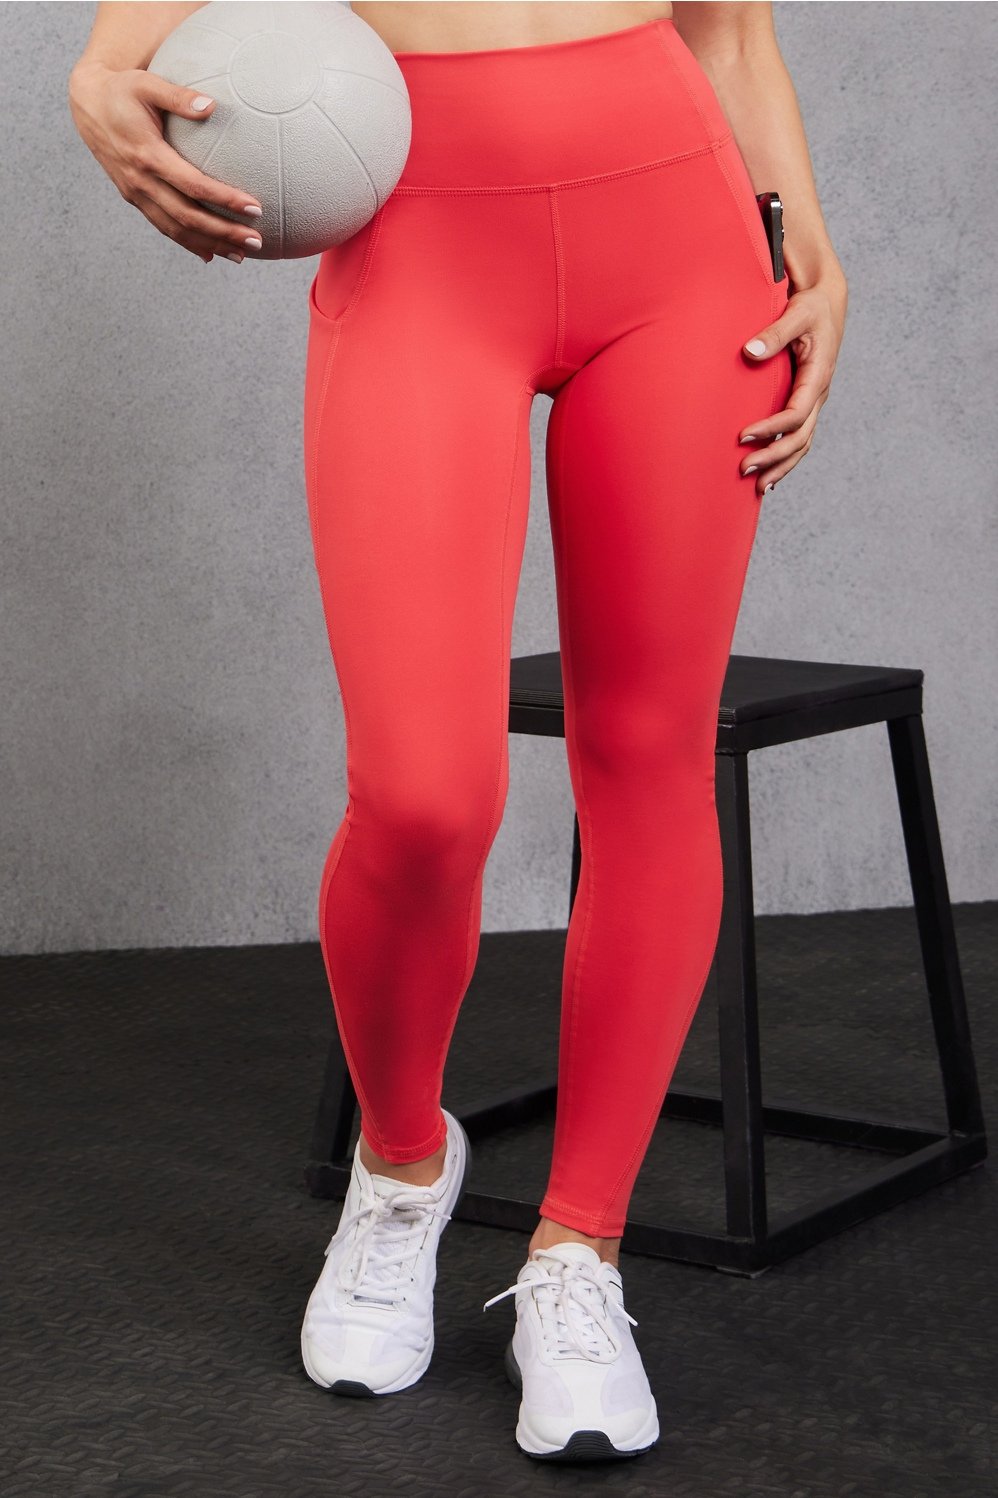 0936 NWT Fabletics Oasis PureLuxe High-Waisted Twist 7/8 Legging XL 12-14